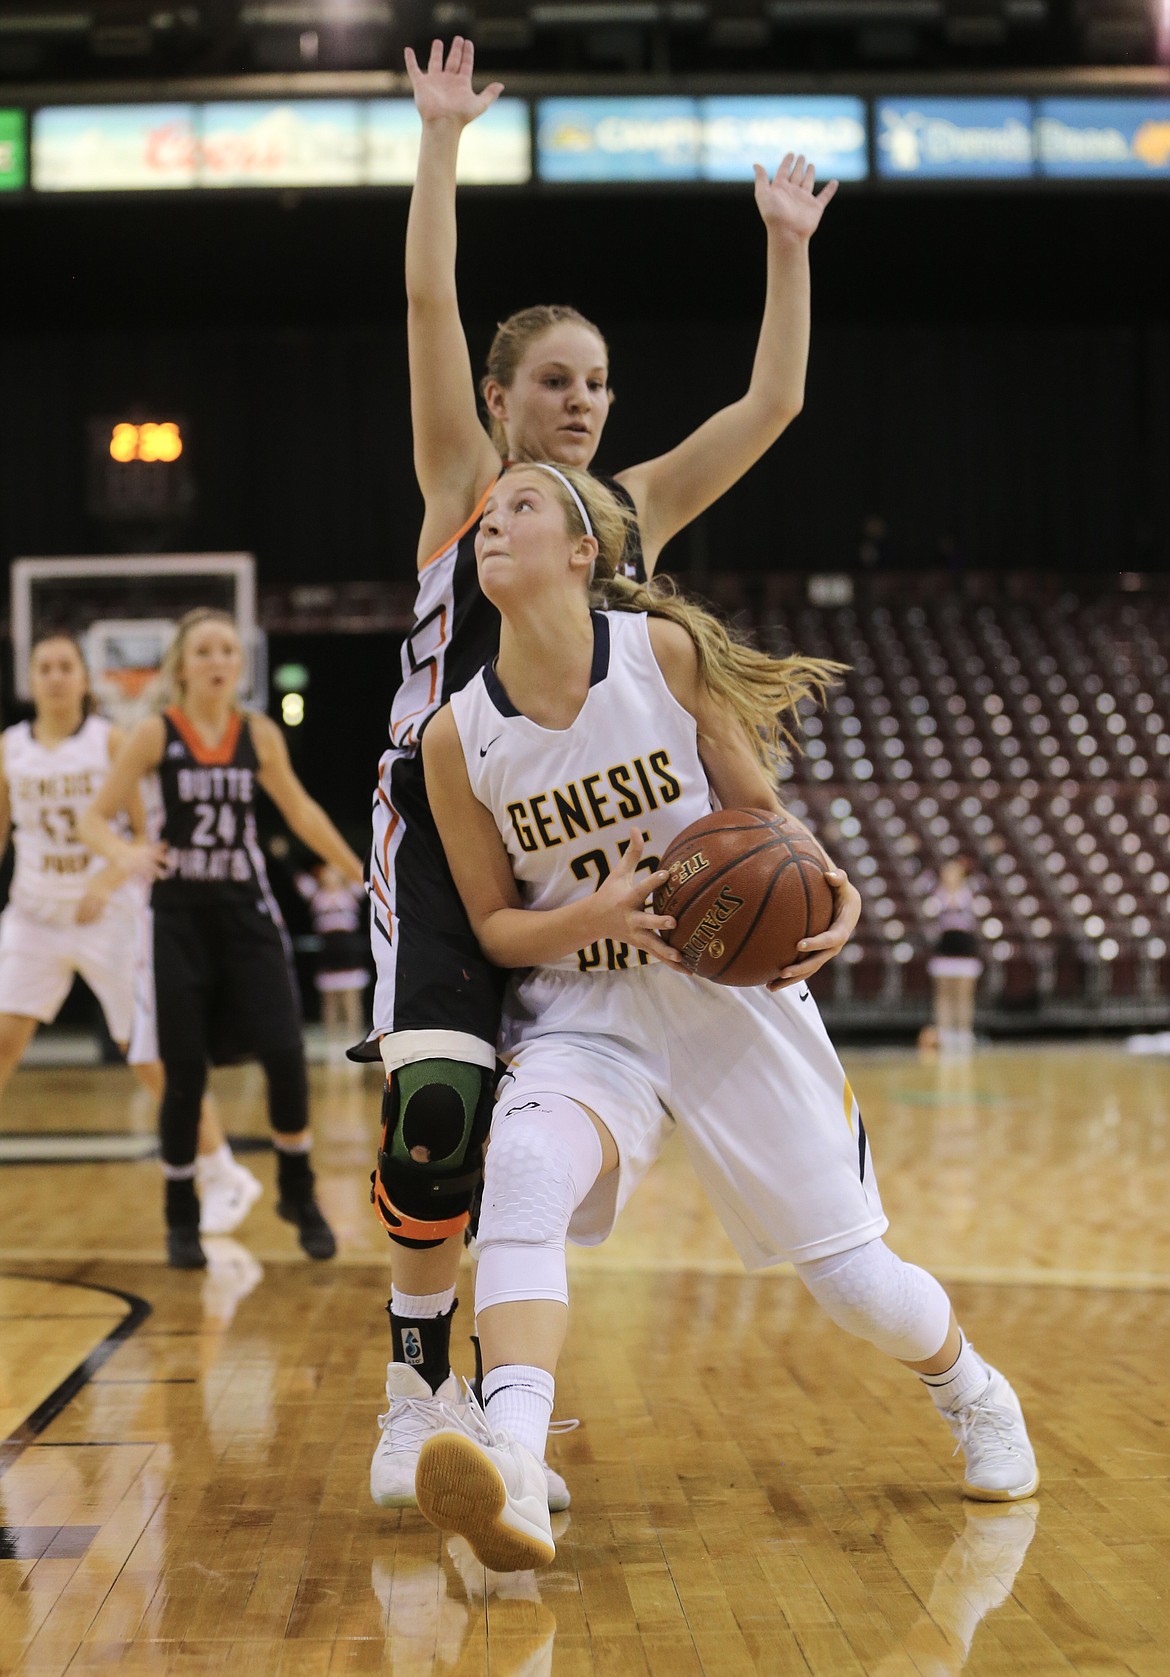 JASON DUCHOW PHOTOGRAPHY
Rachel Schroeder of Genesis Prep drives to the basket against Butte County in the championship game of the state 1A Division II girls basketball tournament Saturday morning at the Ford Idaho Center in Nampa.